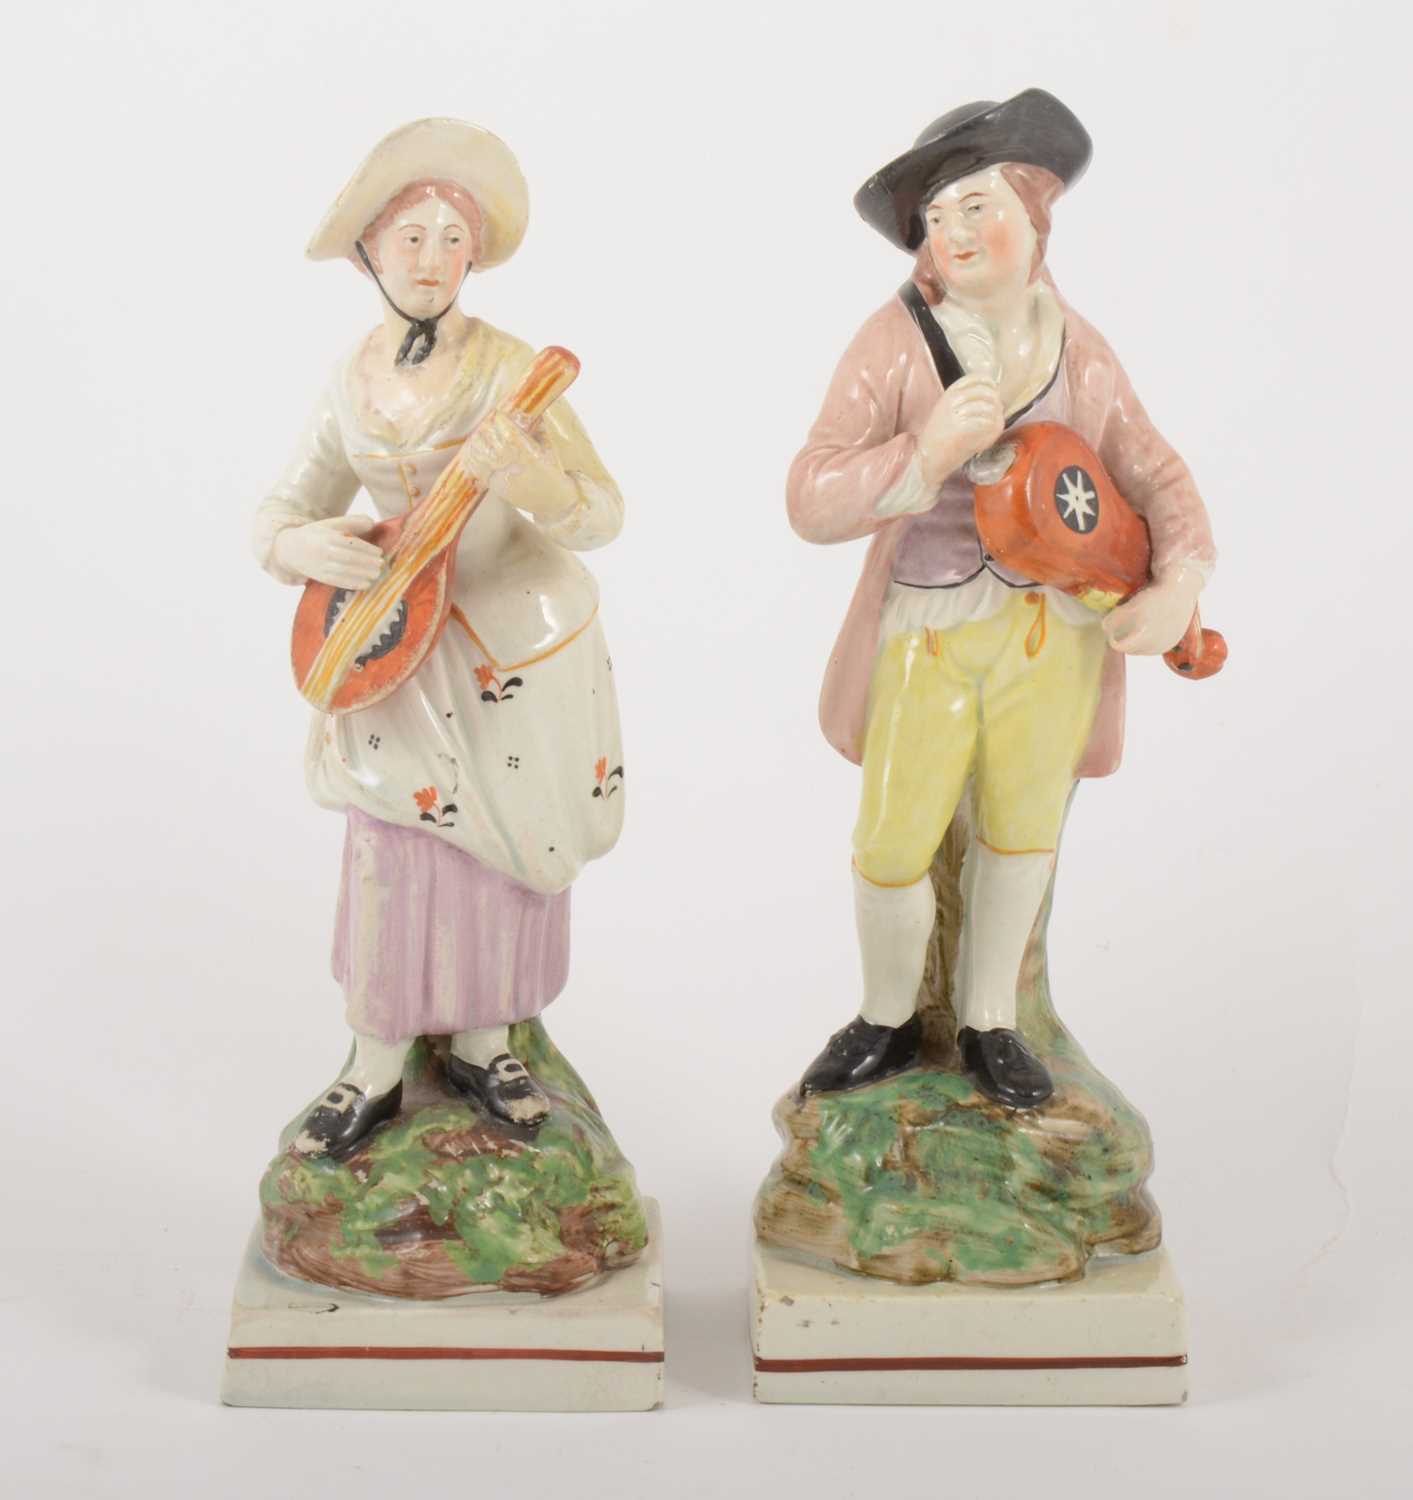 Lot 2 - A pair of Staffordshire pearl glazed earthenware figurines